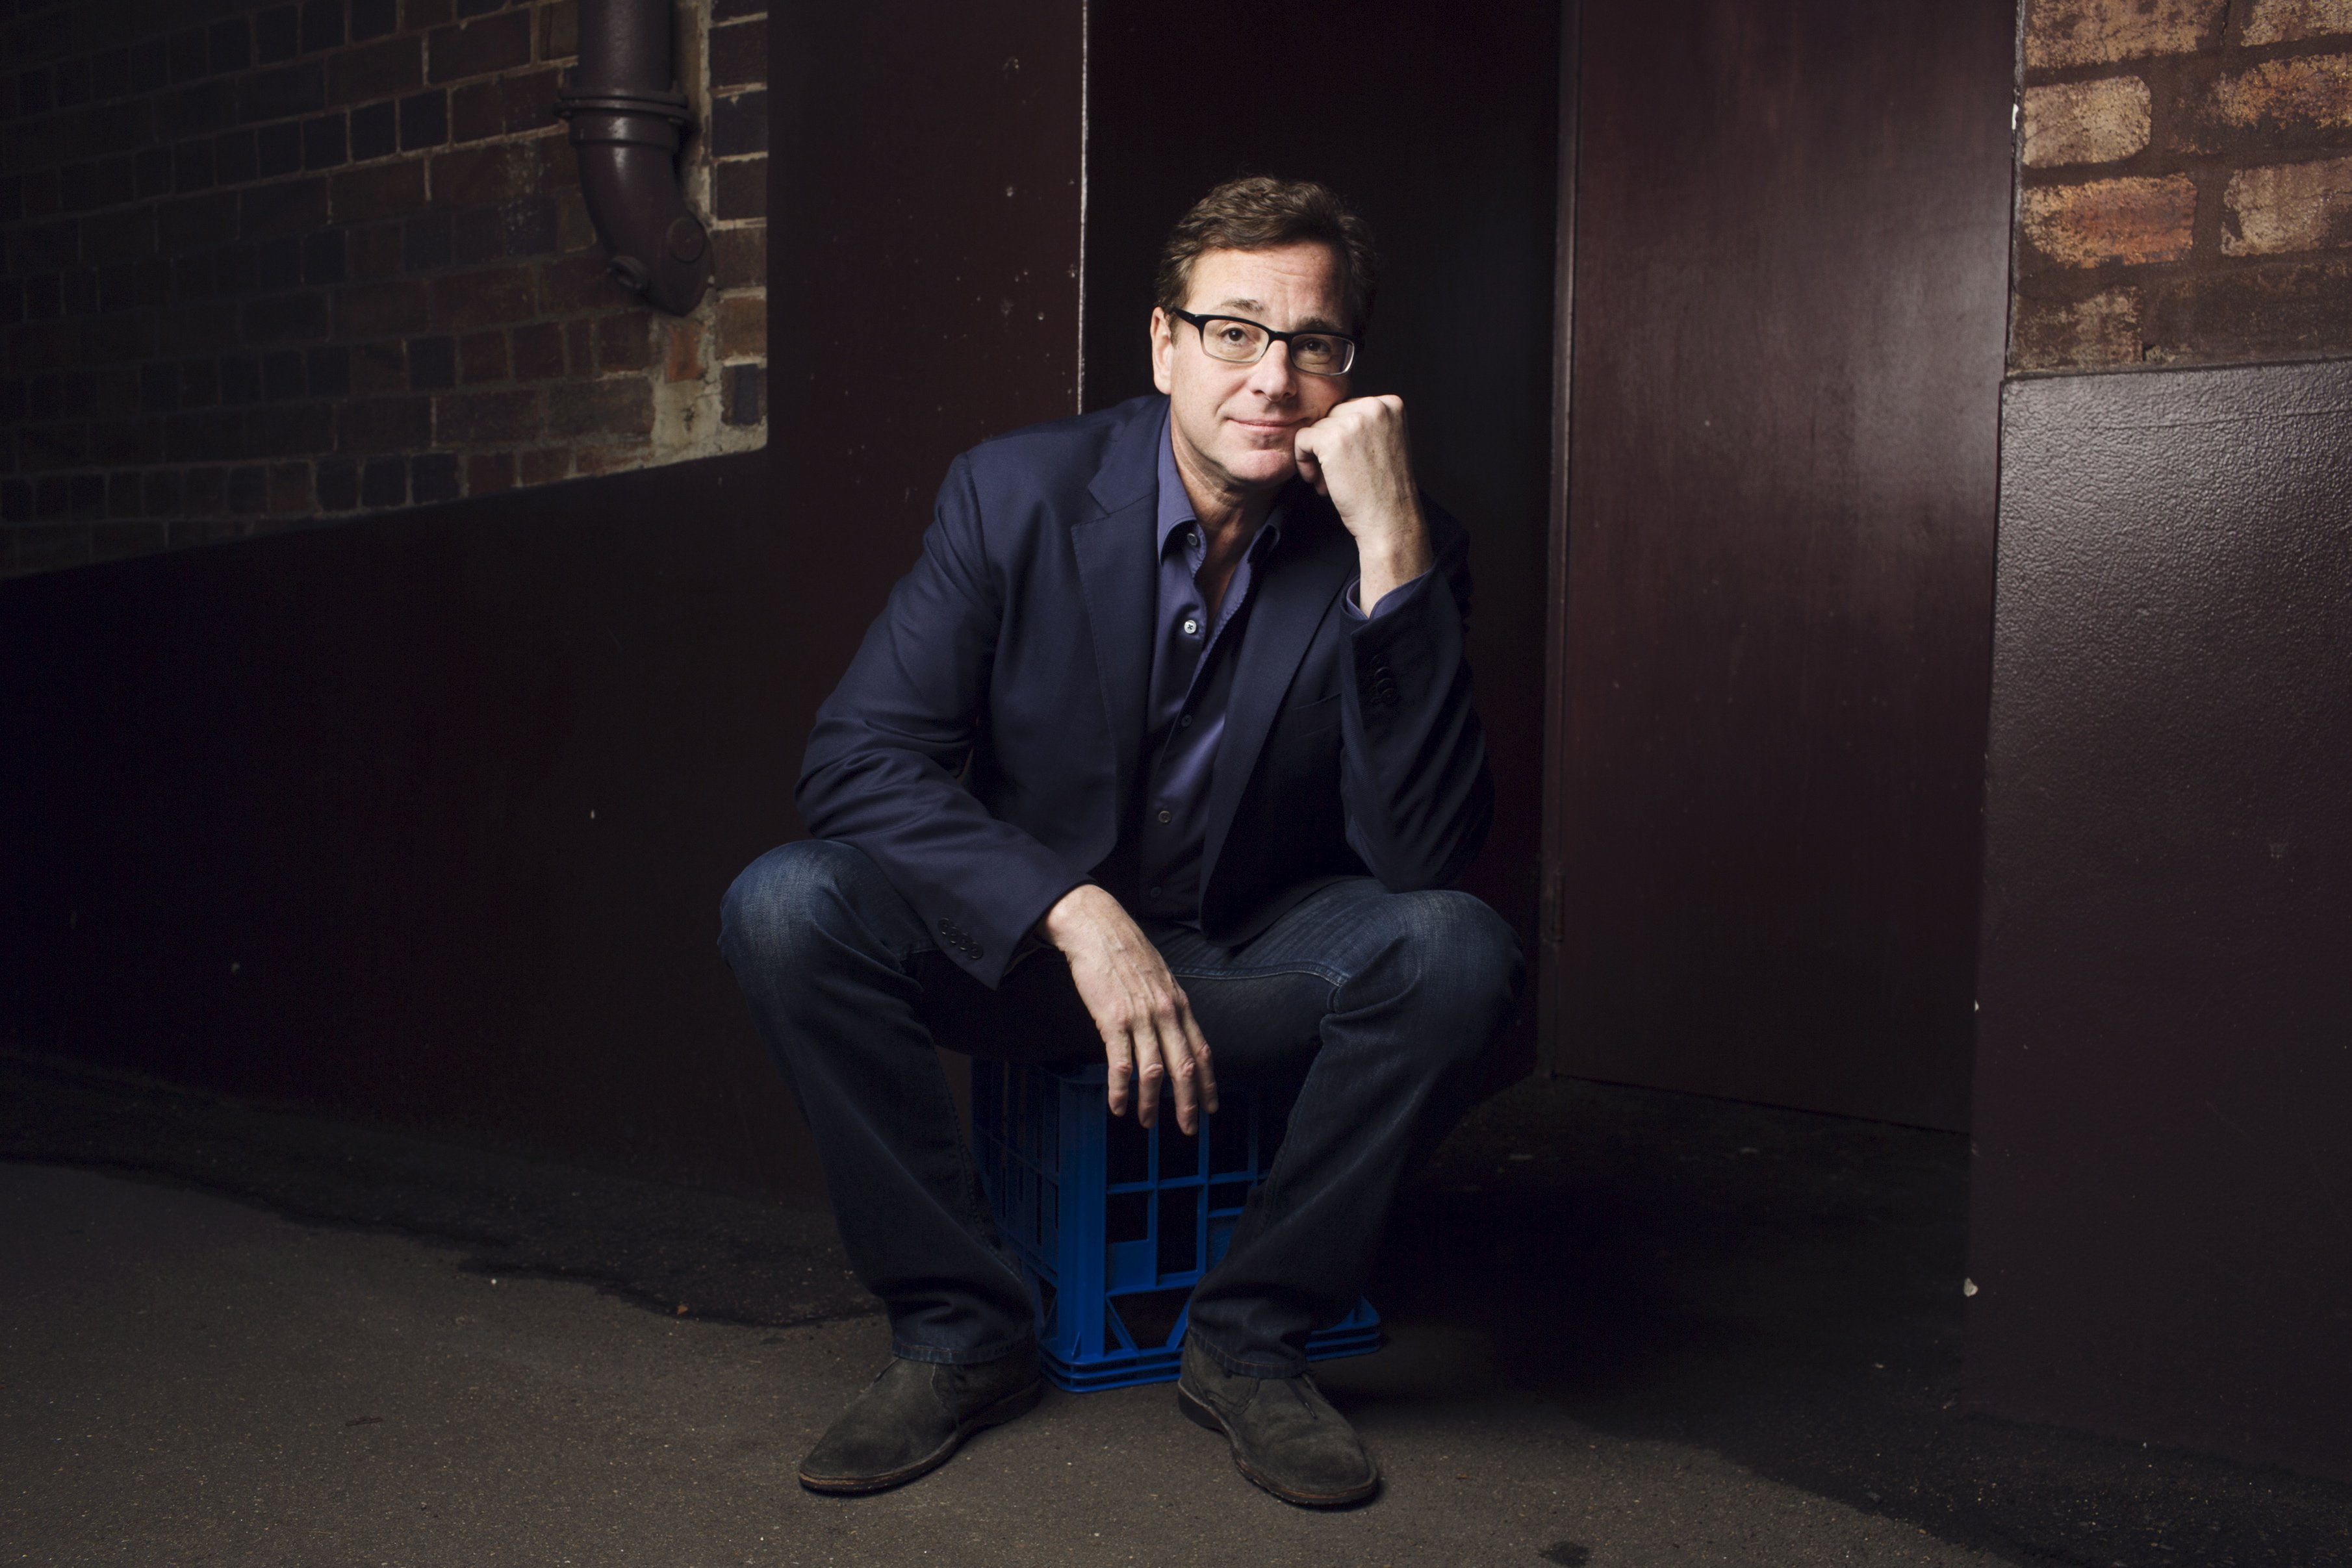 Bob Saget in Sydney ahead of a stand-up comedy show in Melbourne, May 13, 2014 | Source: Getty Images 